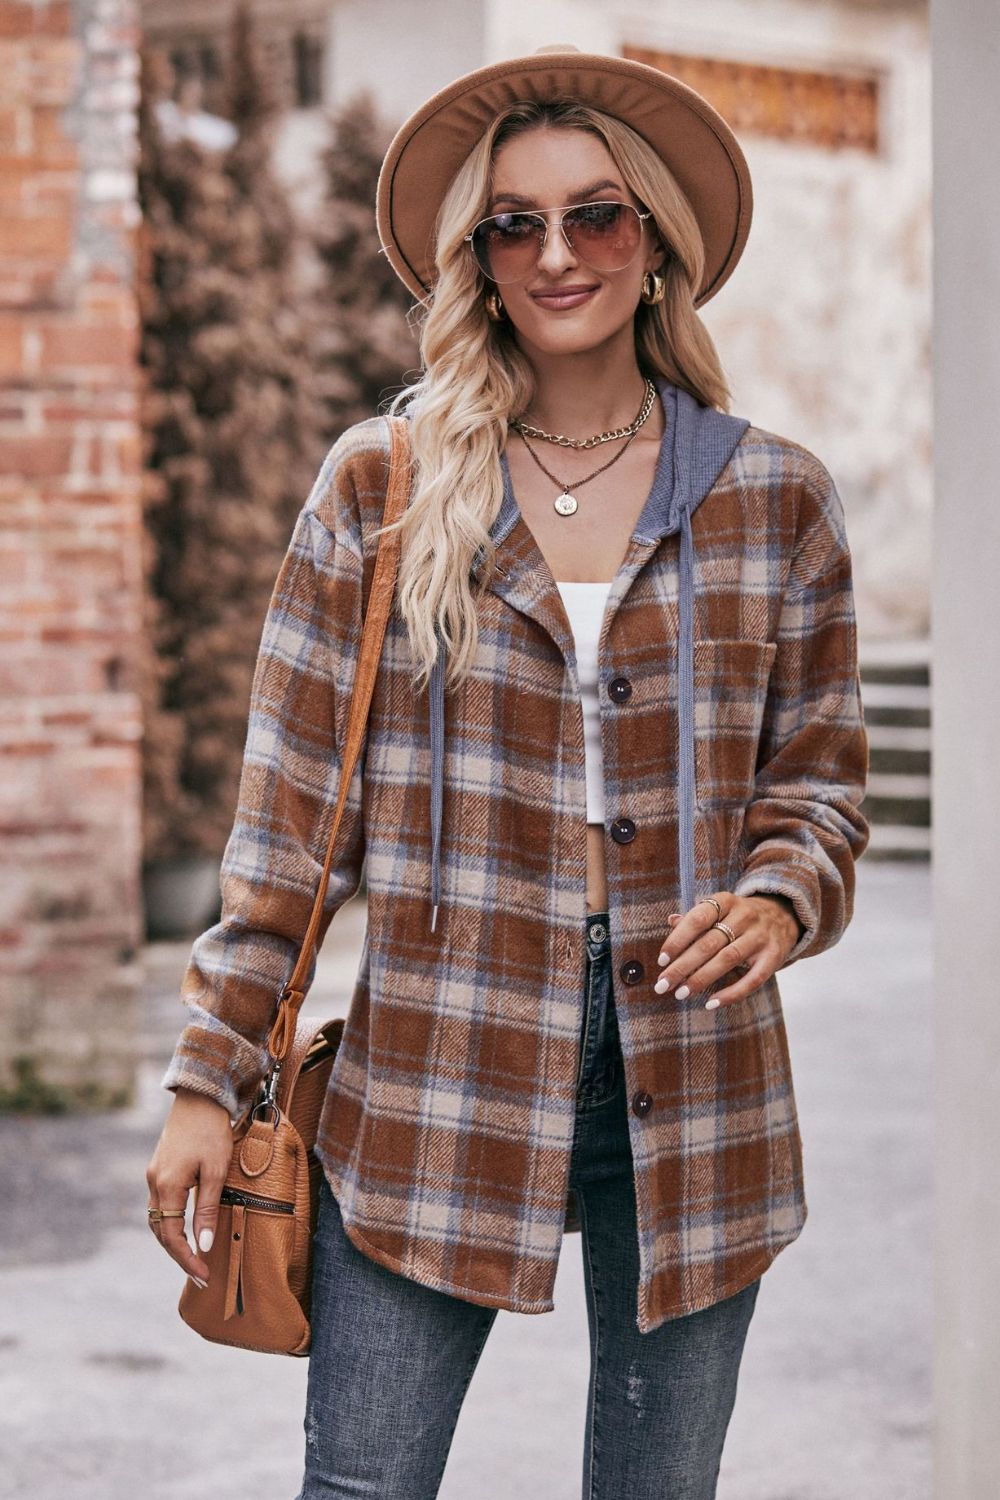 Women's Jacket with Plaid Dropped Shoulder Hood and Longline Length Chestnut